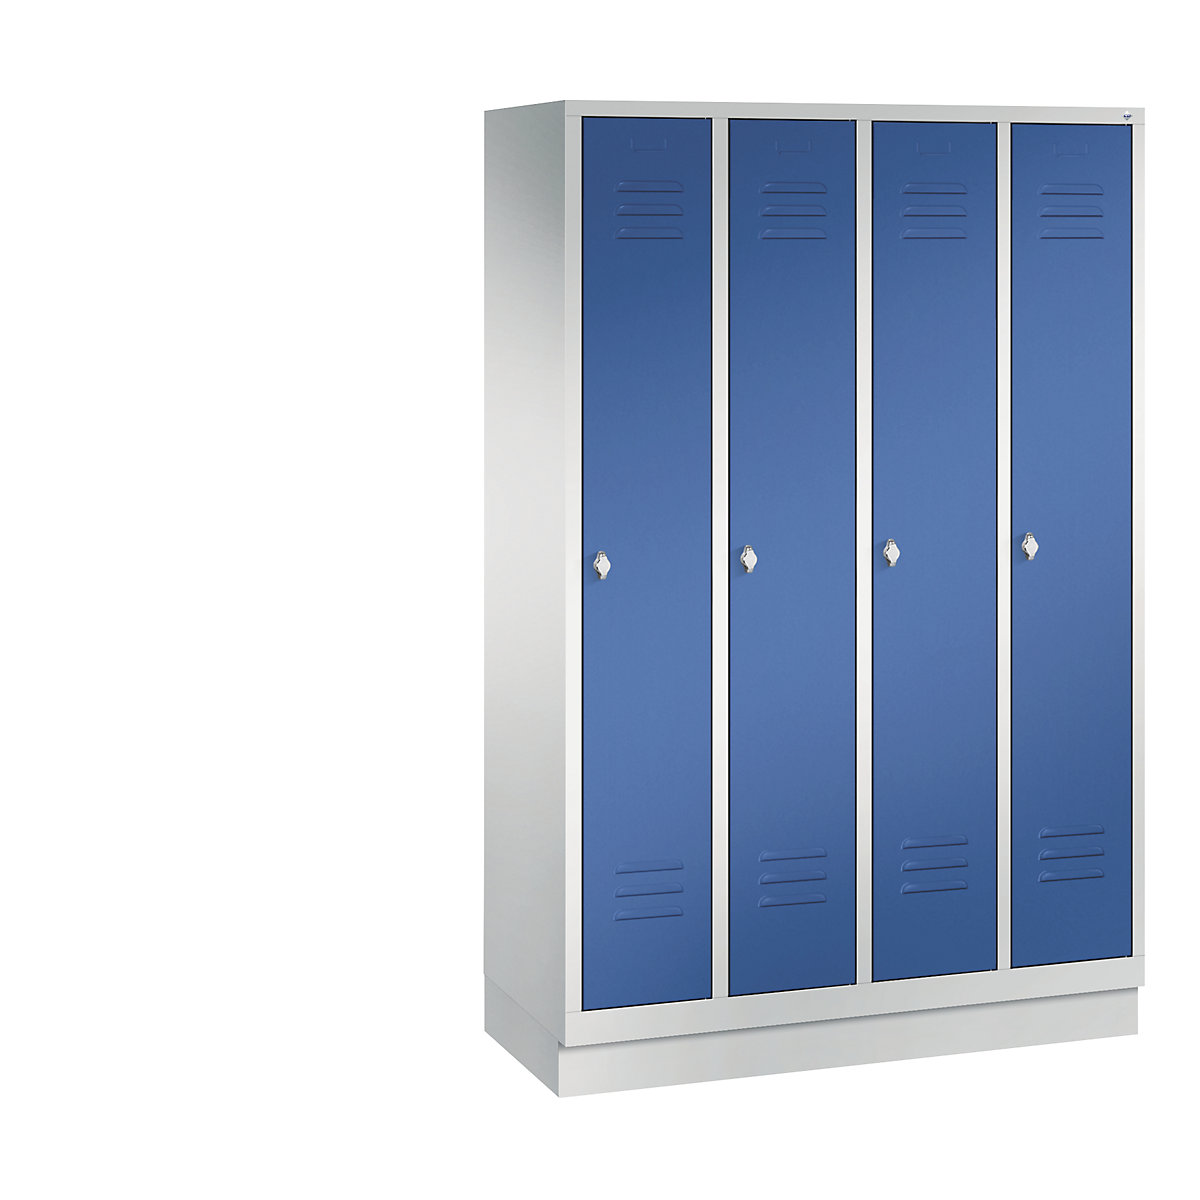 CLASSIC cloakroom locker with plinth – C+P, 4 compartments, compartment width 300 mm, light grey / gentian blue-4